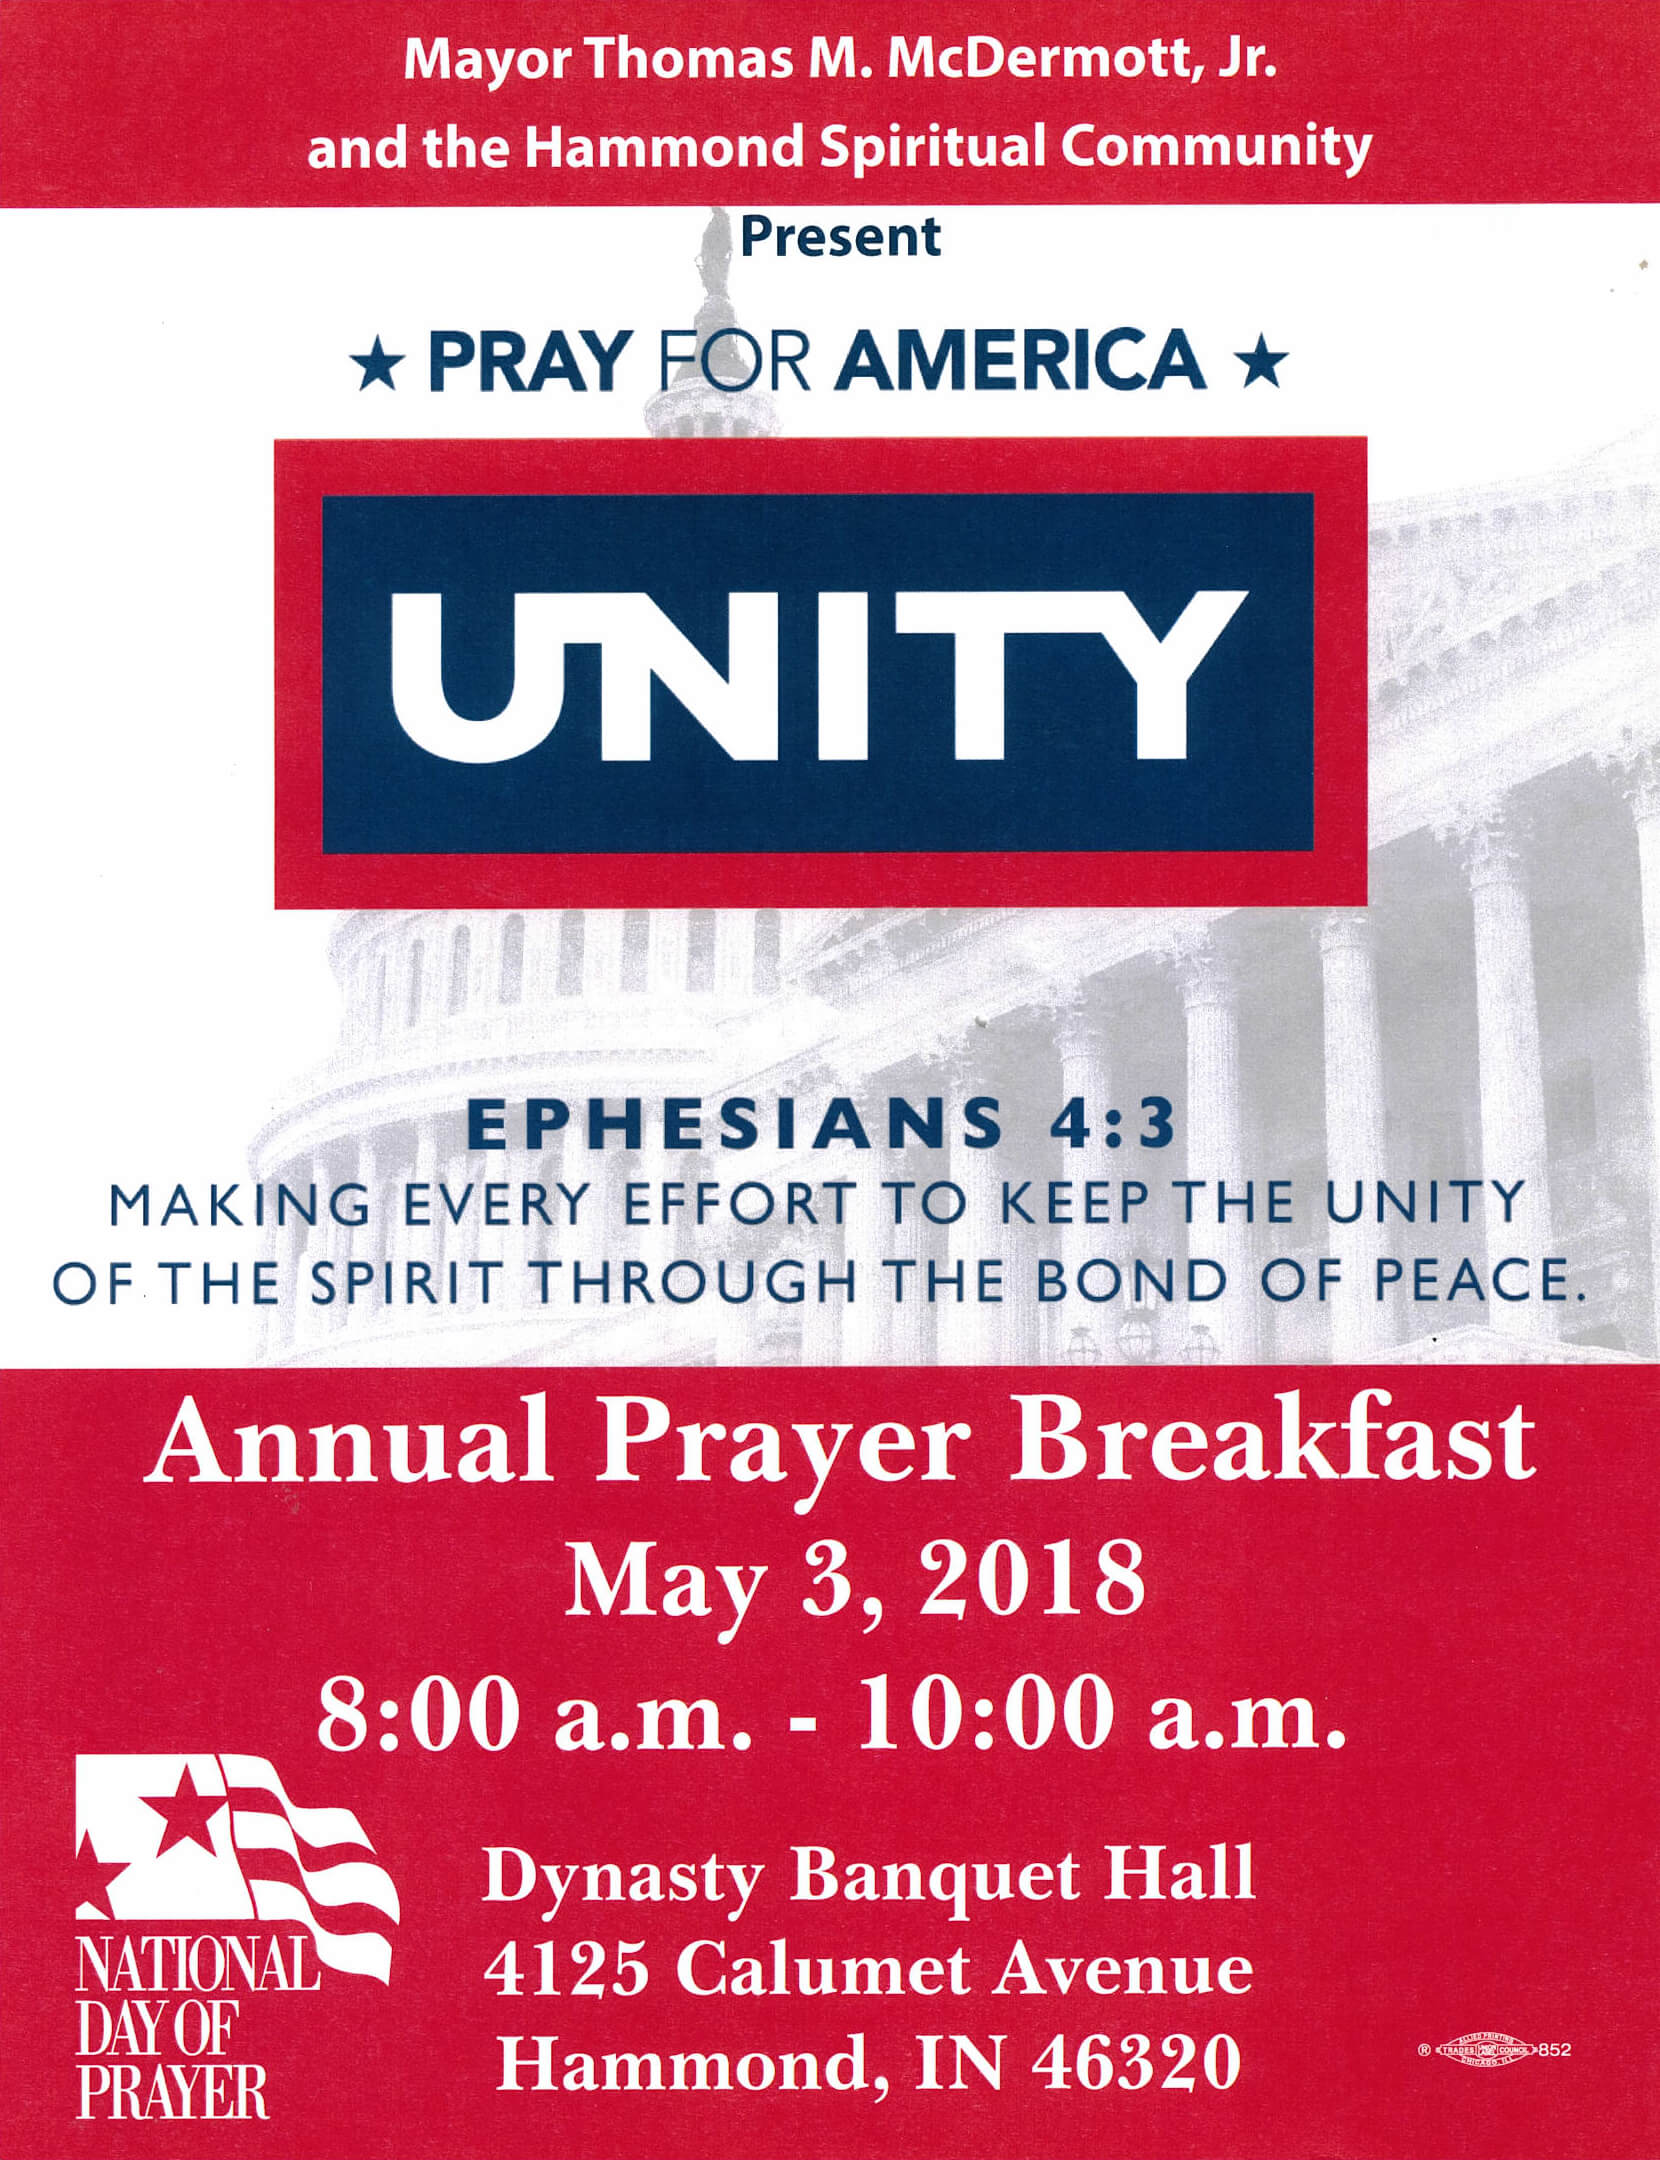 Mayor Thomas M. McDermott, Jr. and the Department of Community Development, will host the 2018 Annual National Day of Prayer.